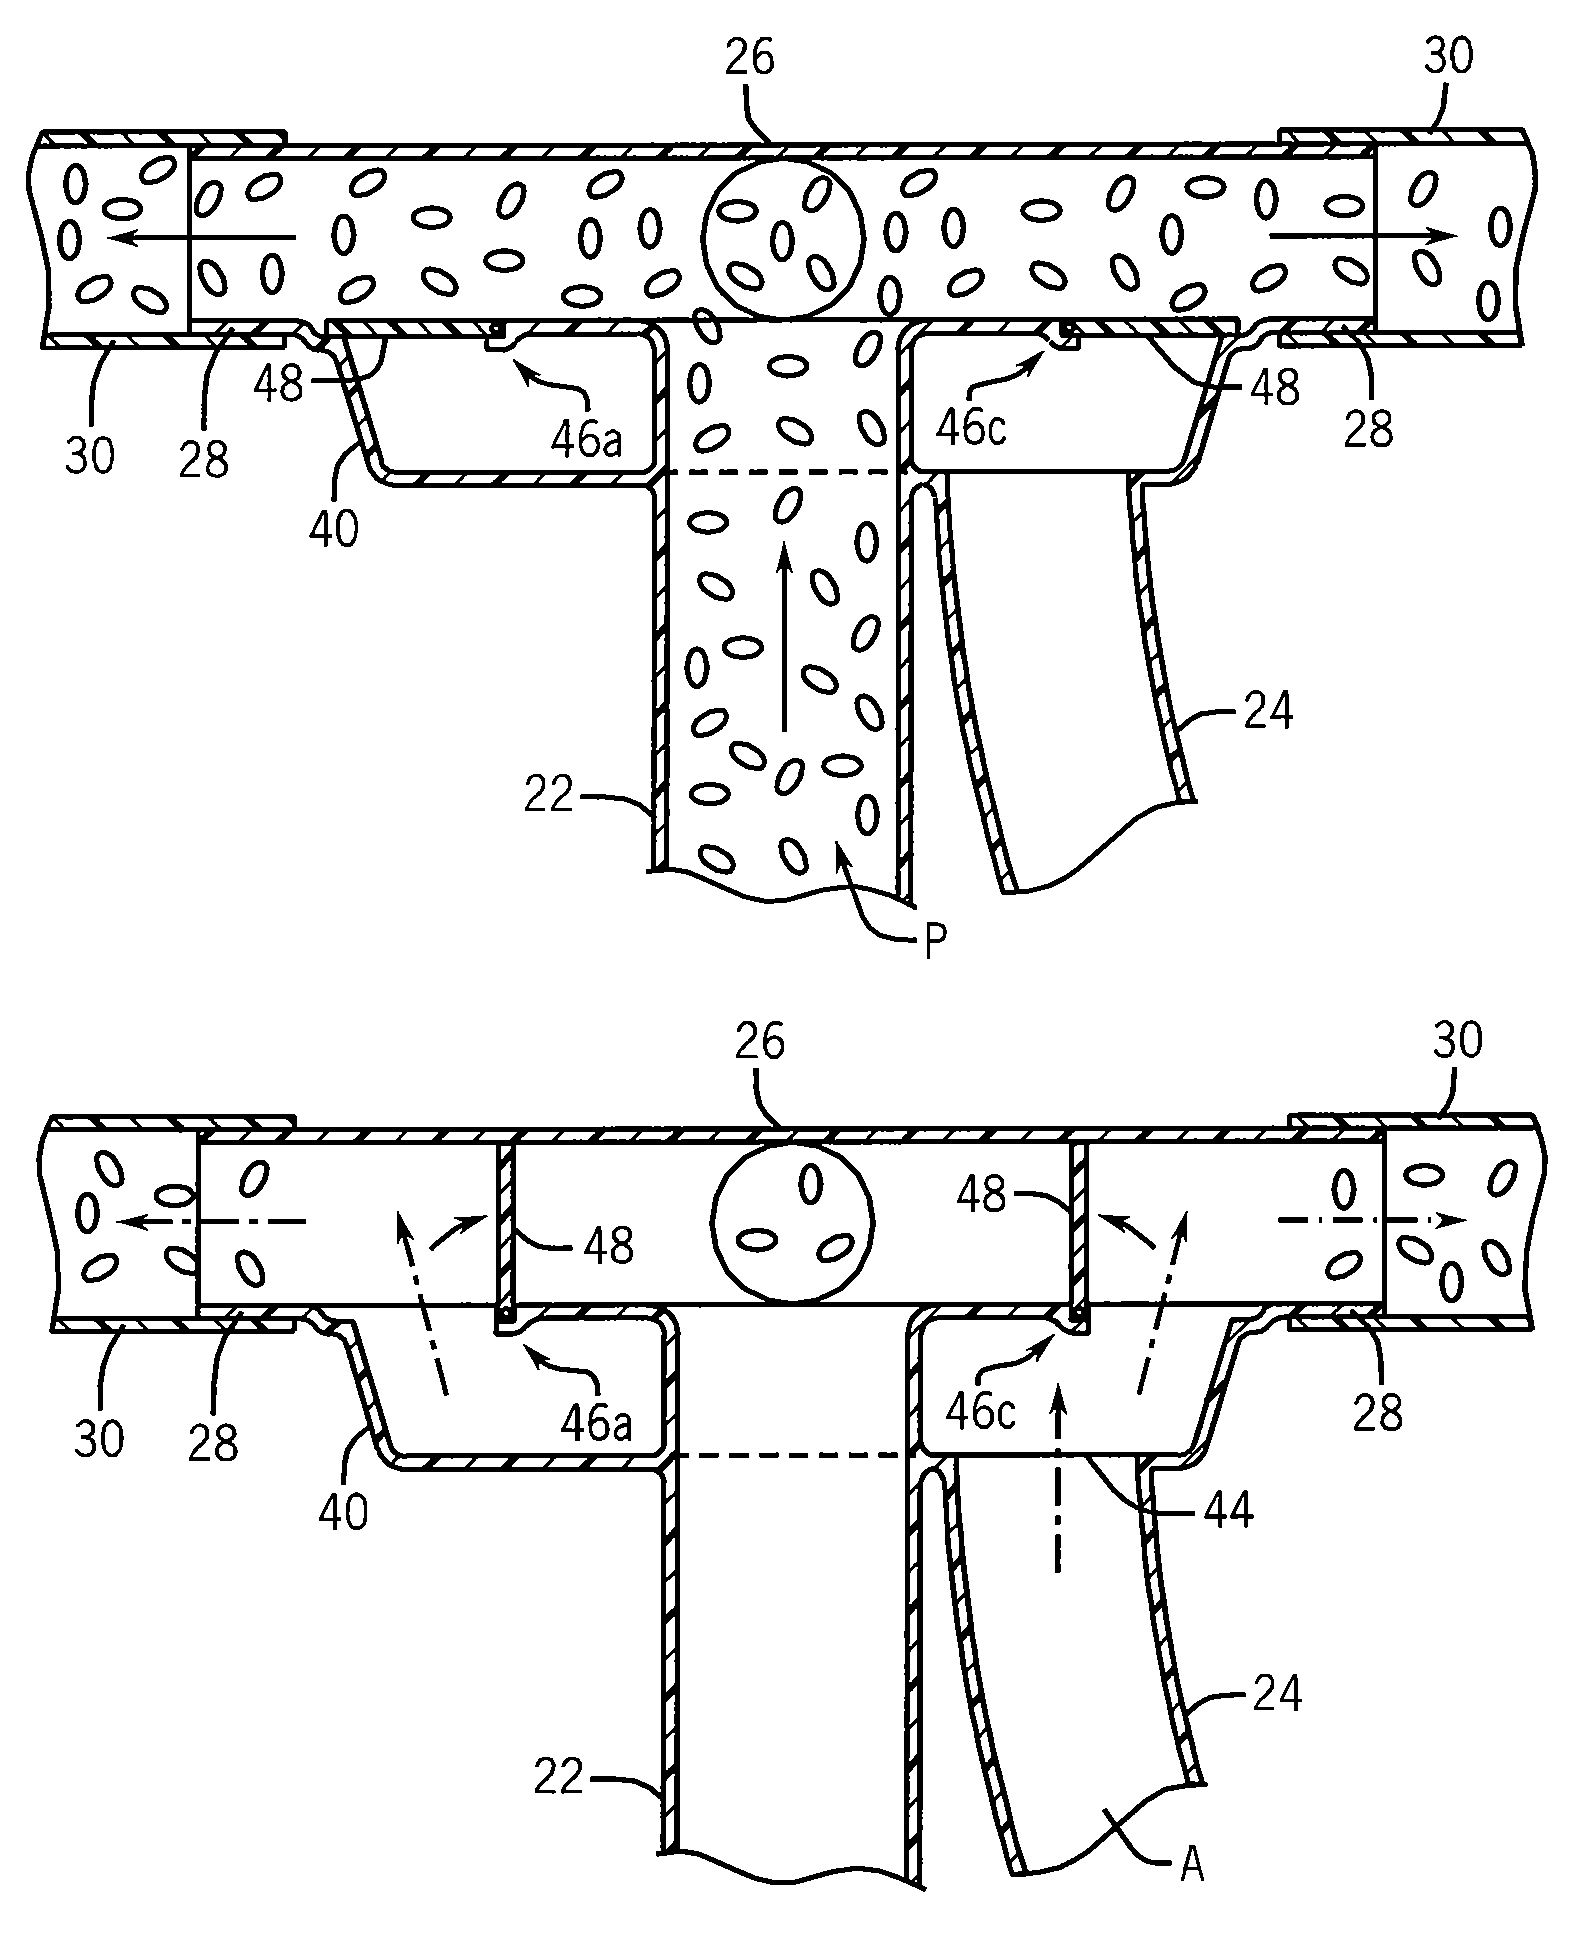 Method and apparatus for sectional control of air seeder distribution system for a farm implement